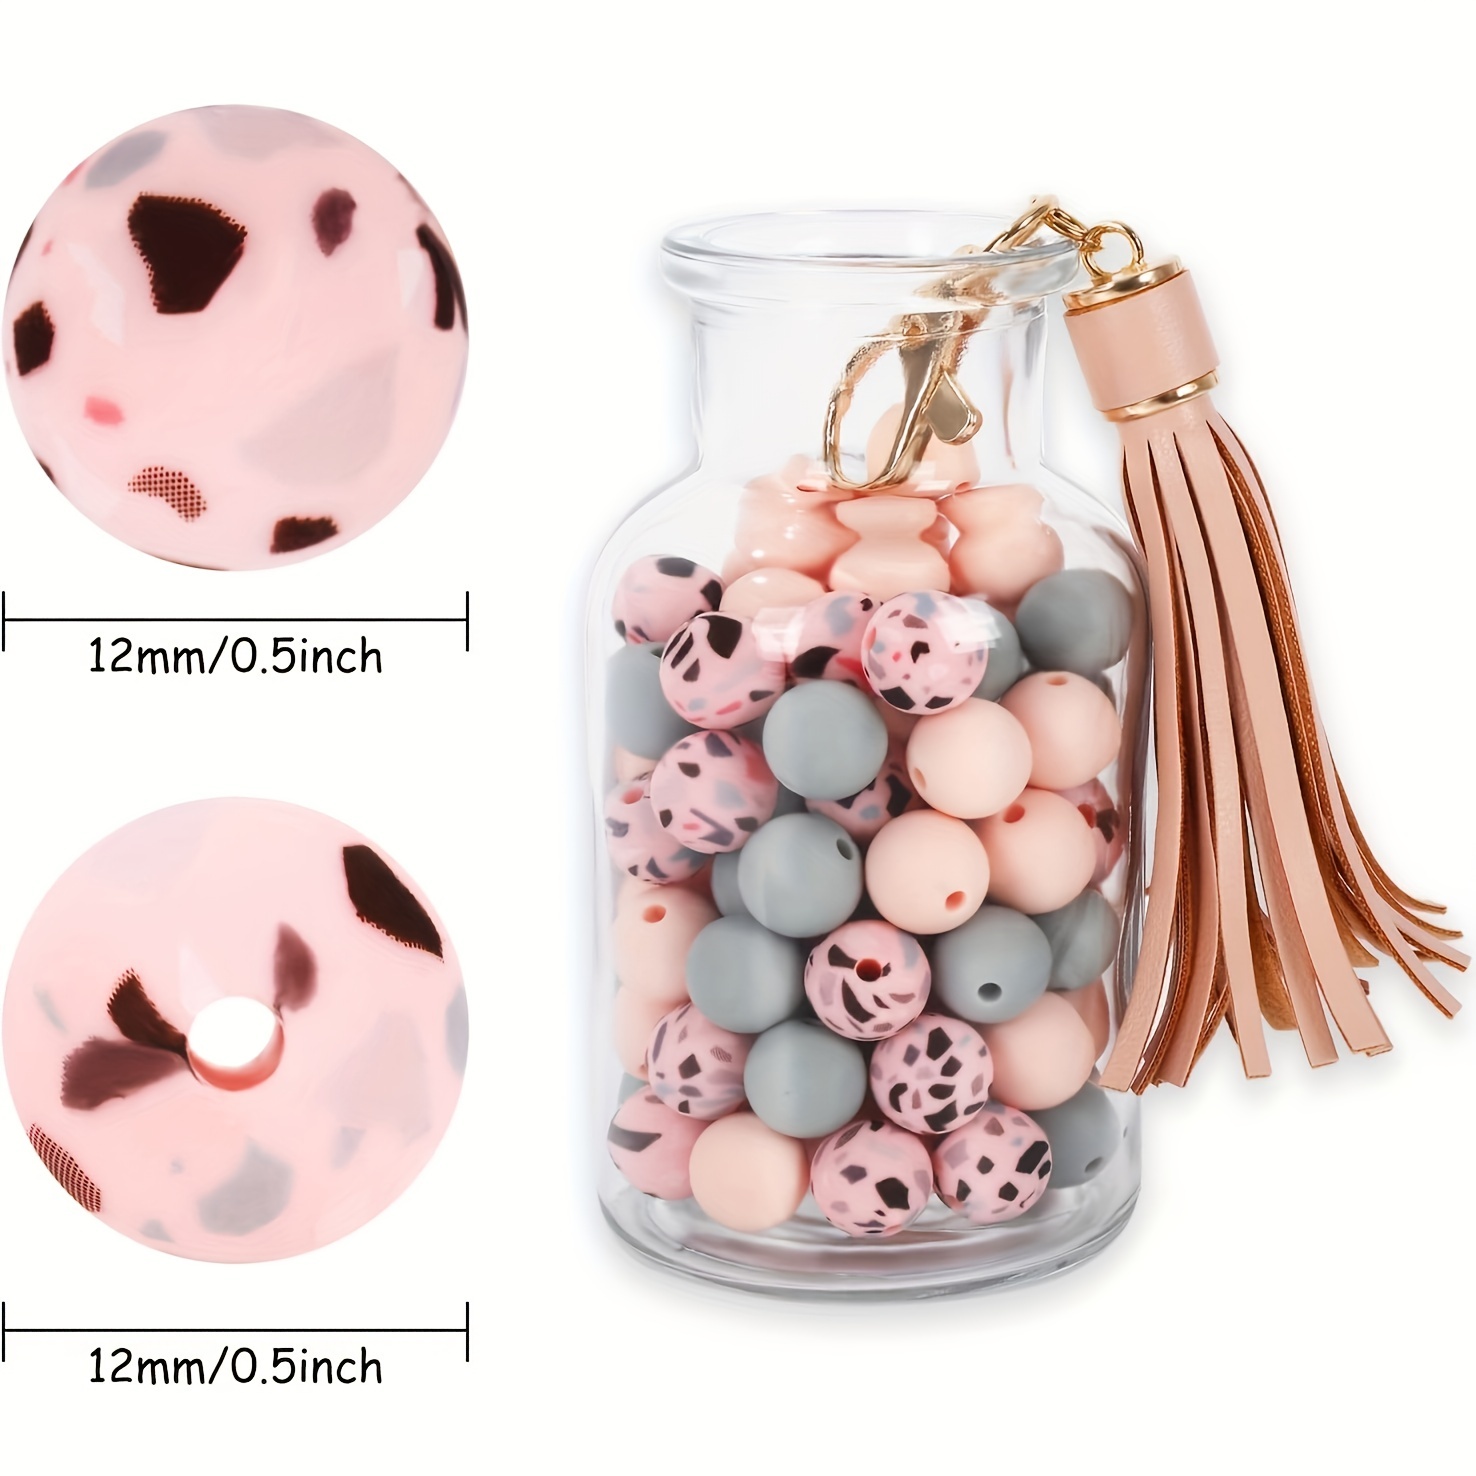 255PCS DIY Silicone Beaded Keychain Making Kit, 115mm Round Candy Color  Silicone Beads Anti-drop Chain For Keychain Bracelet Necklace Jewelry DIY  Hand